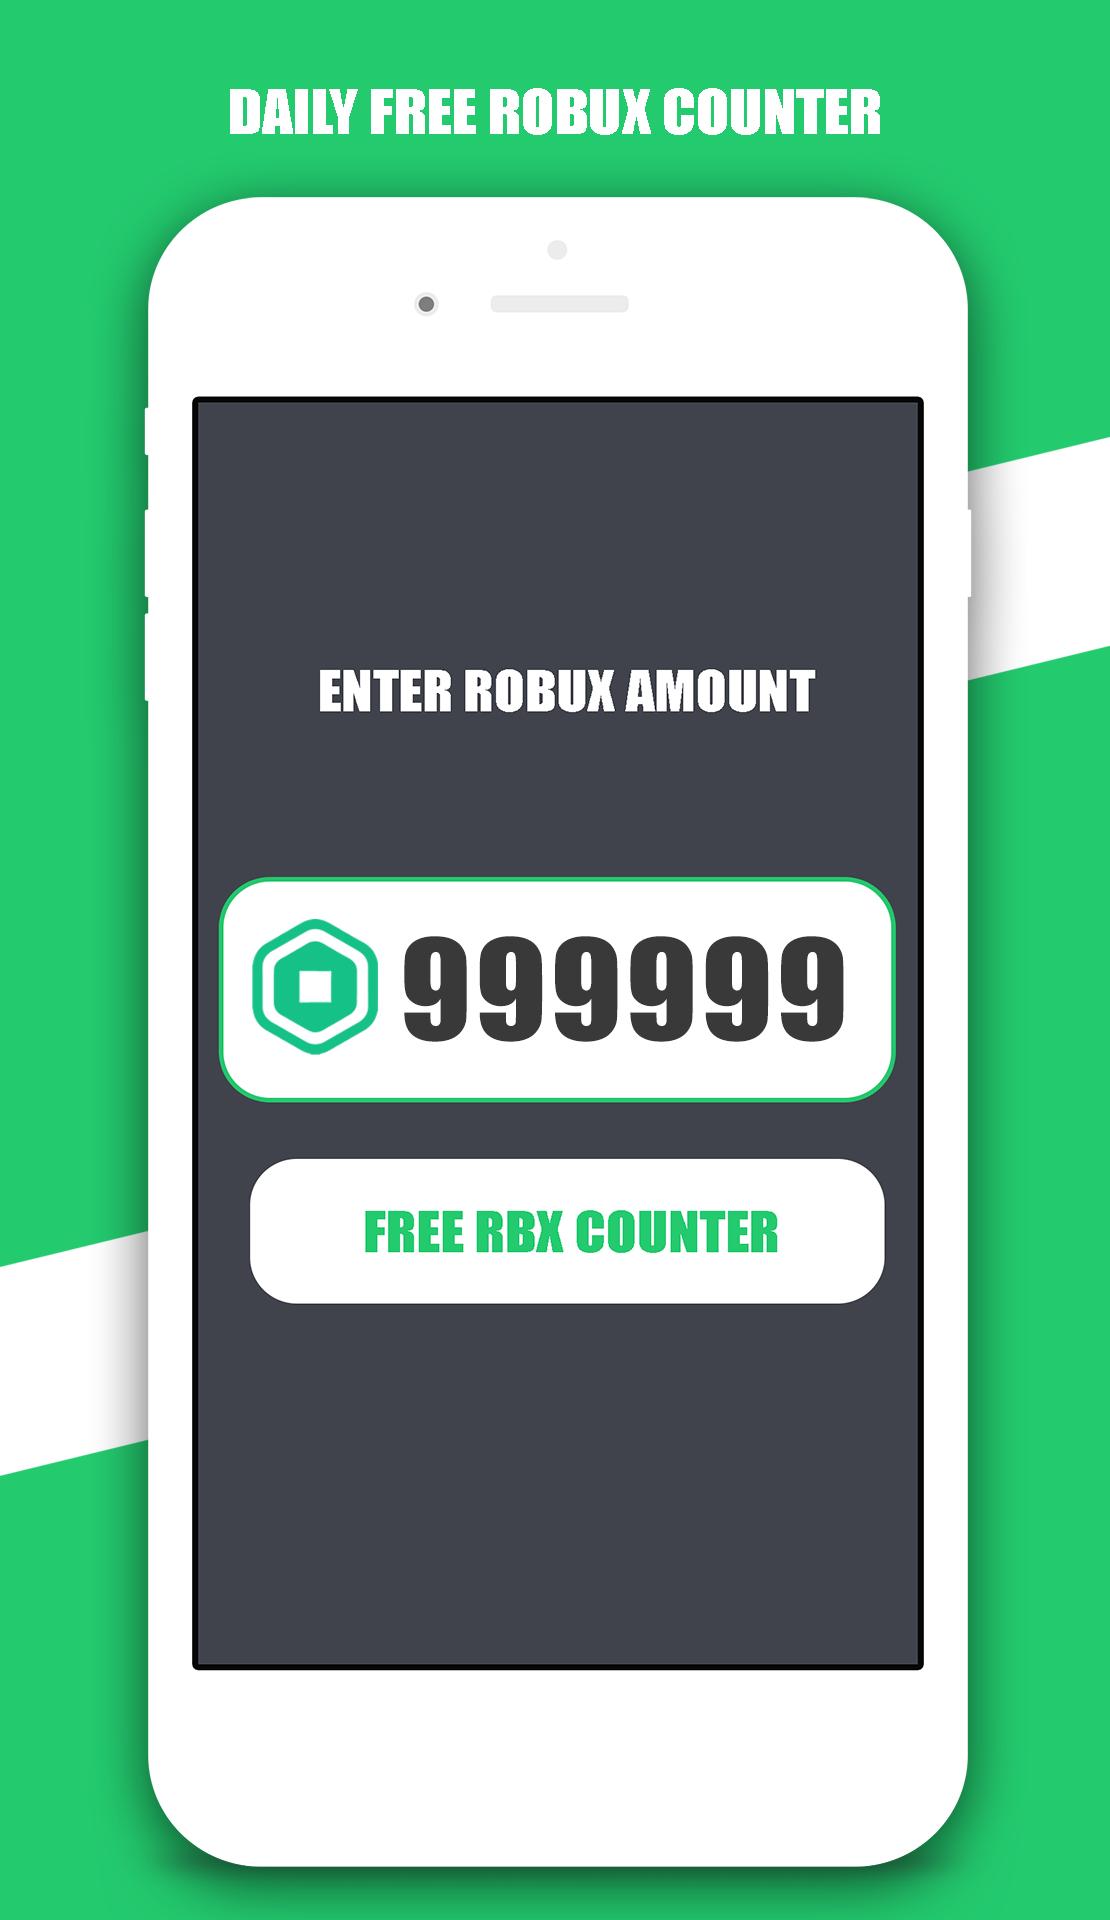 Free Robux Counter For Android Apk Download - how to get free robux without installing apps 2020